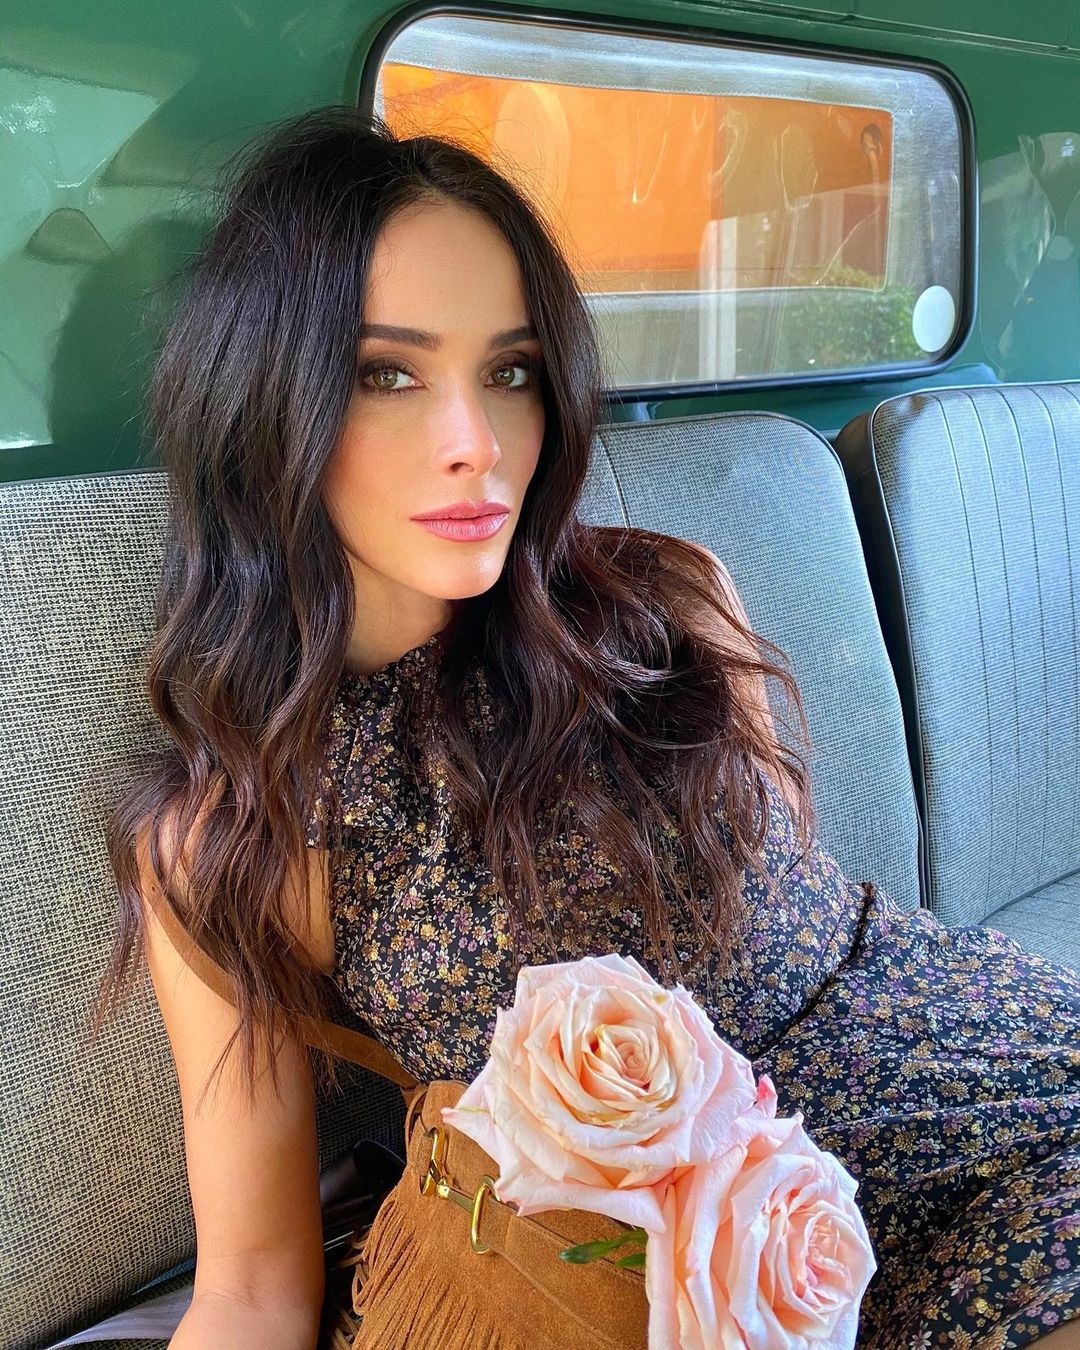 Yes Abigail Spencer I want to jerk and cum on your gorgeous face!